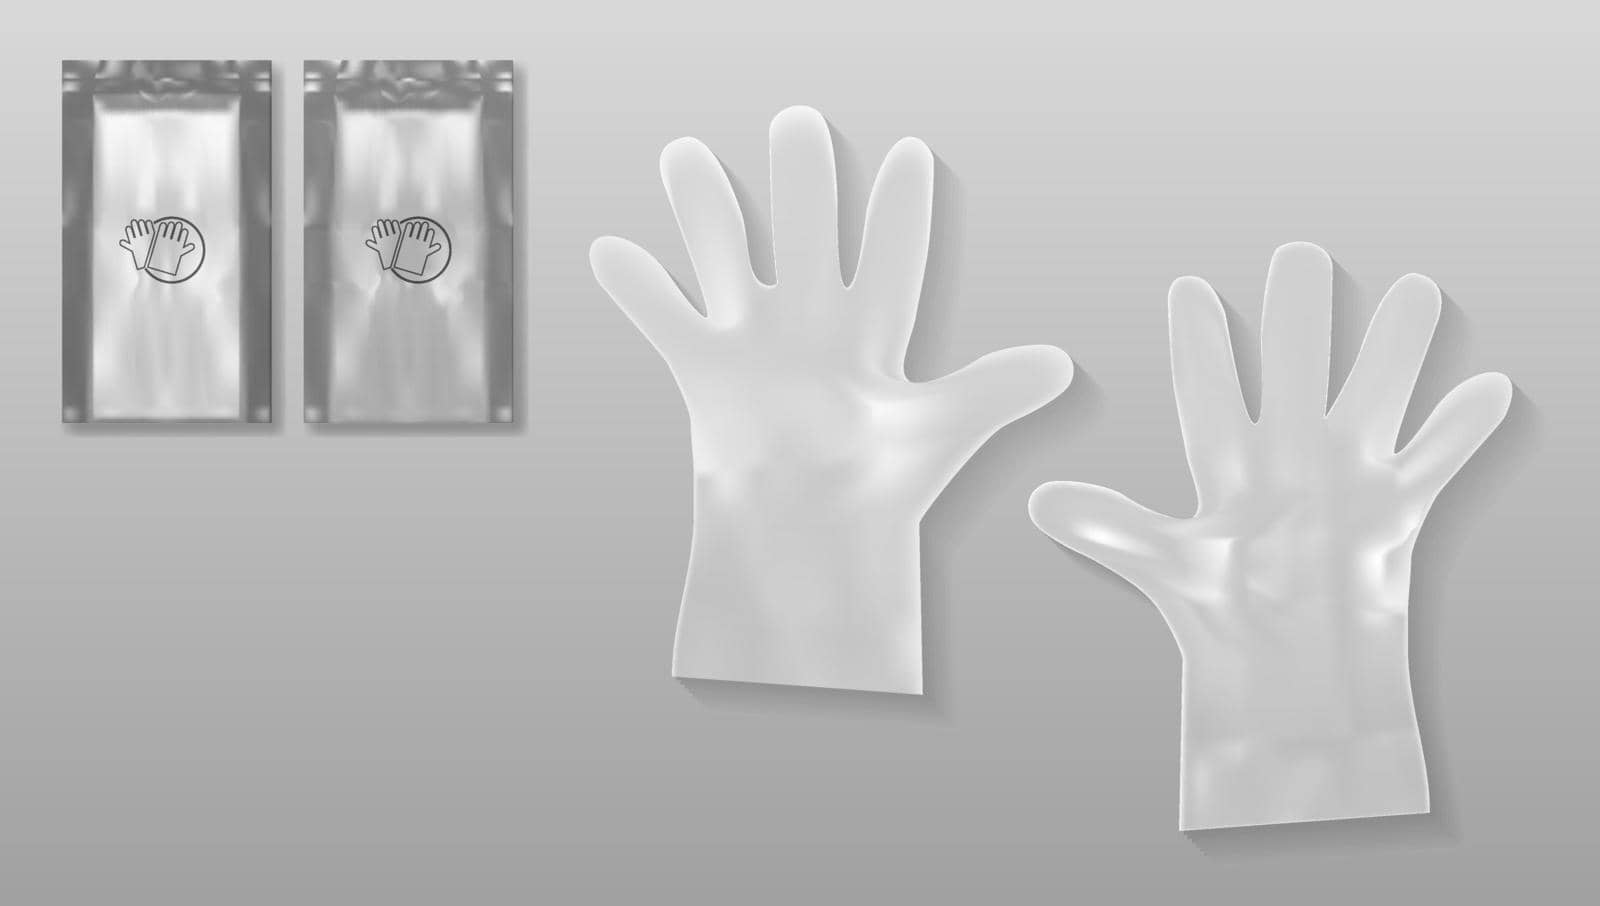 Disposable Transparent Plastic Gloves With Packing For Medical Use Or Cosmetics Purpose by VectorThings